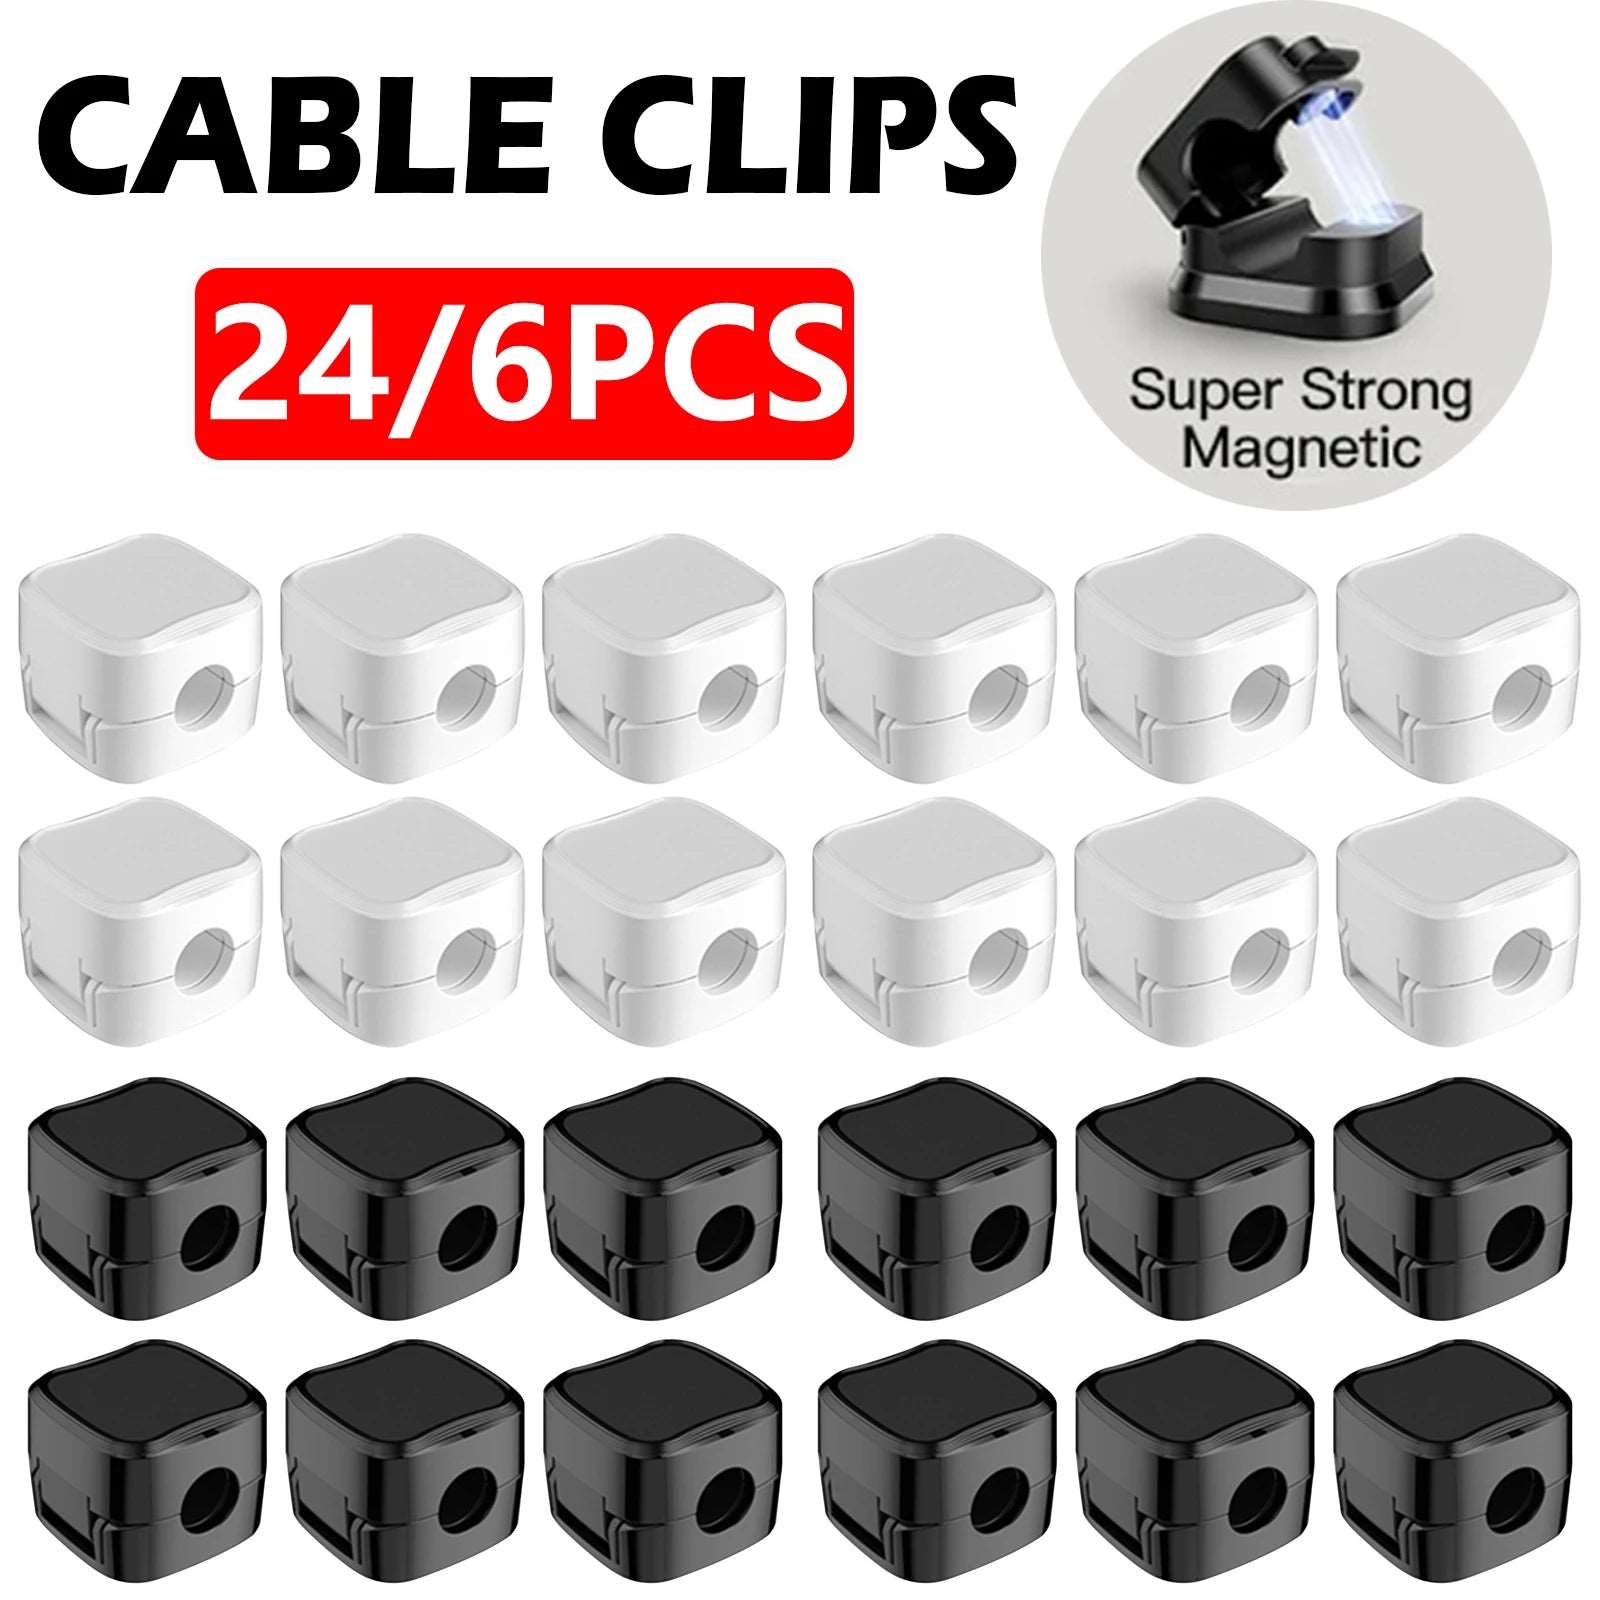 24/6PCS Magnetic cable organiser Clips - The Trend